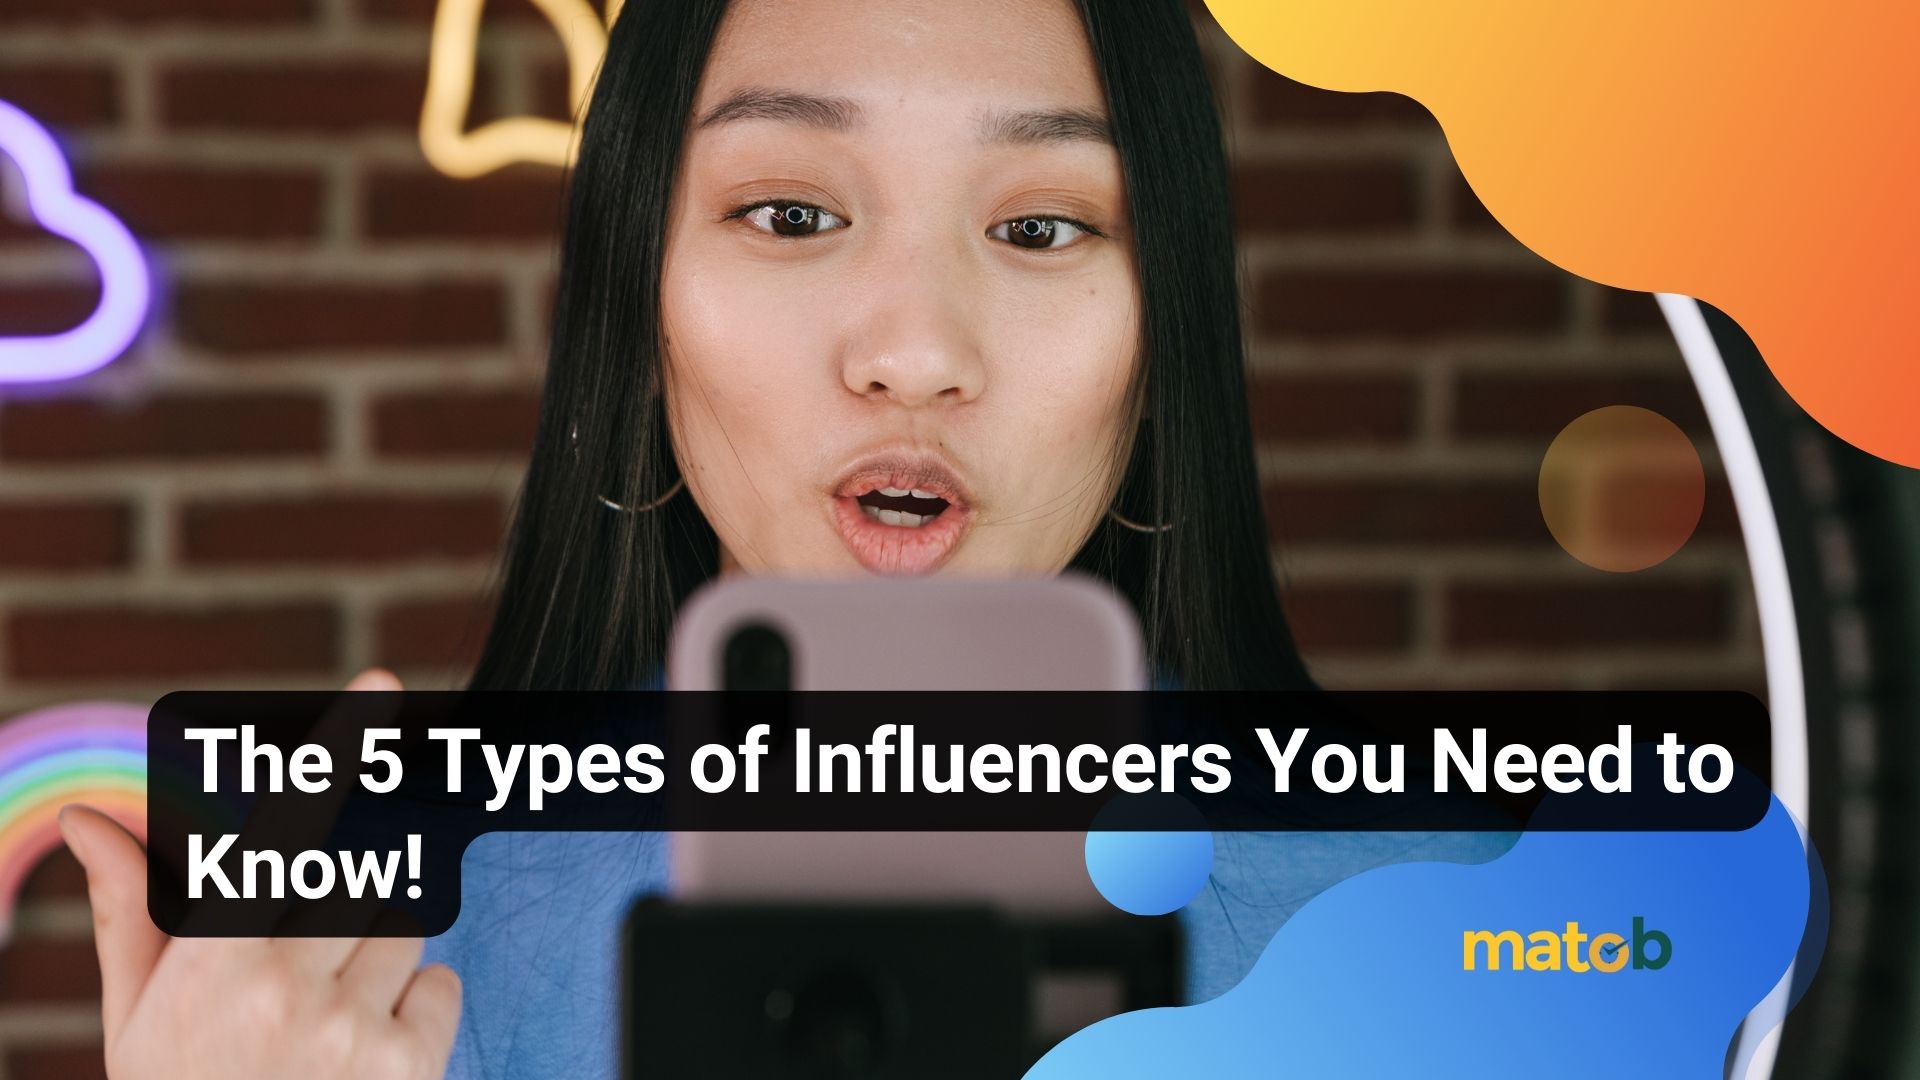 The 5 Types of Influencers You Need to Know!